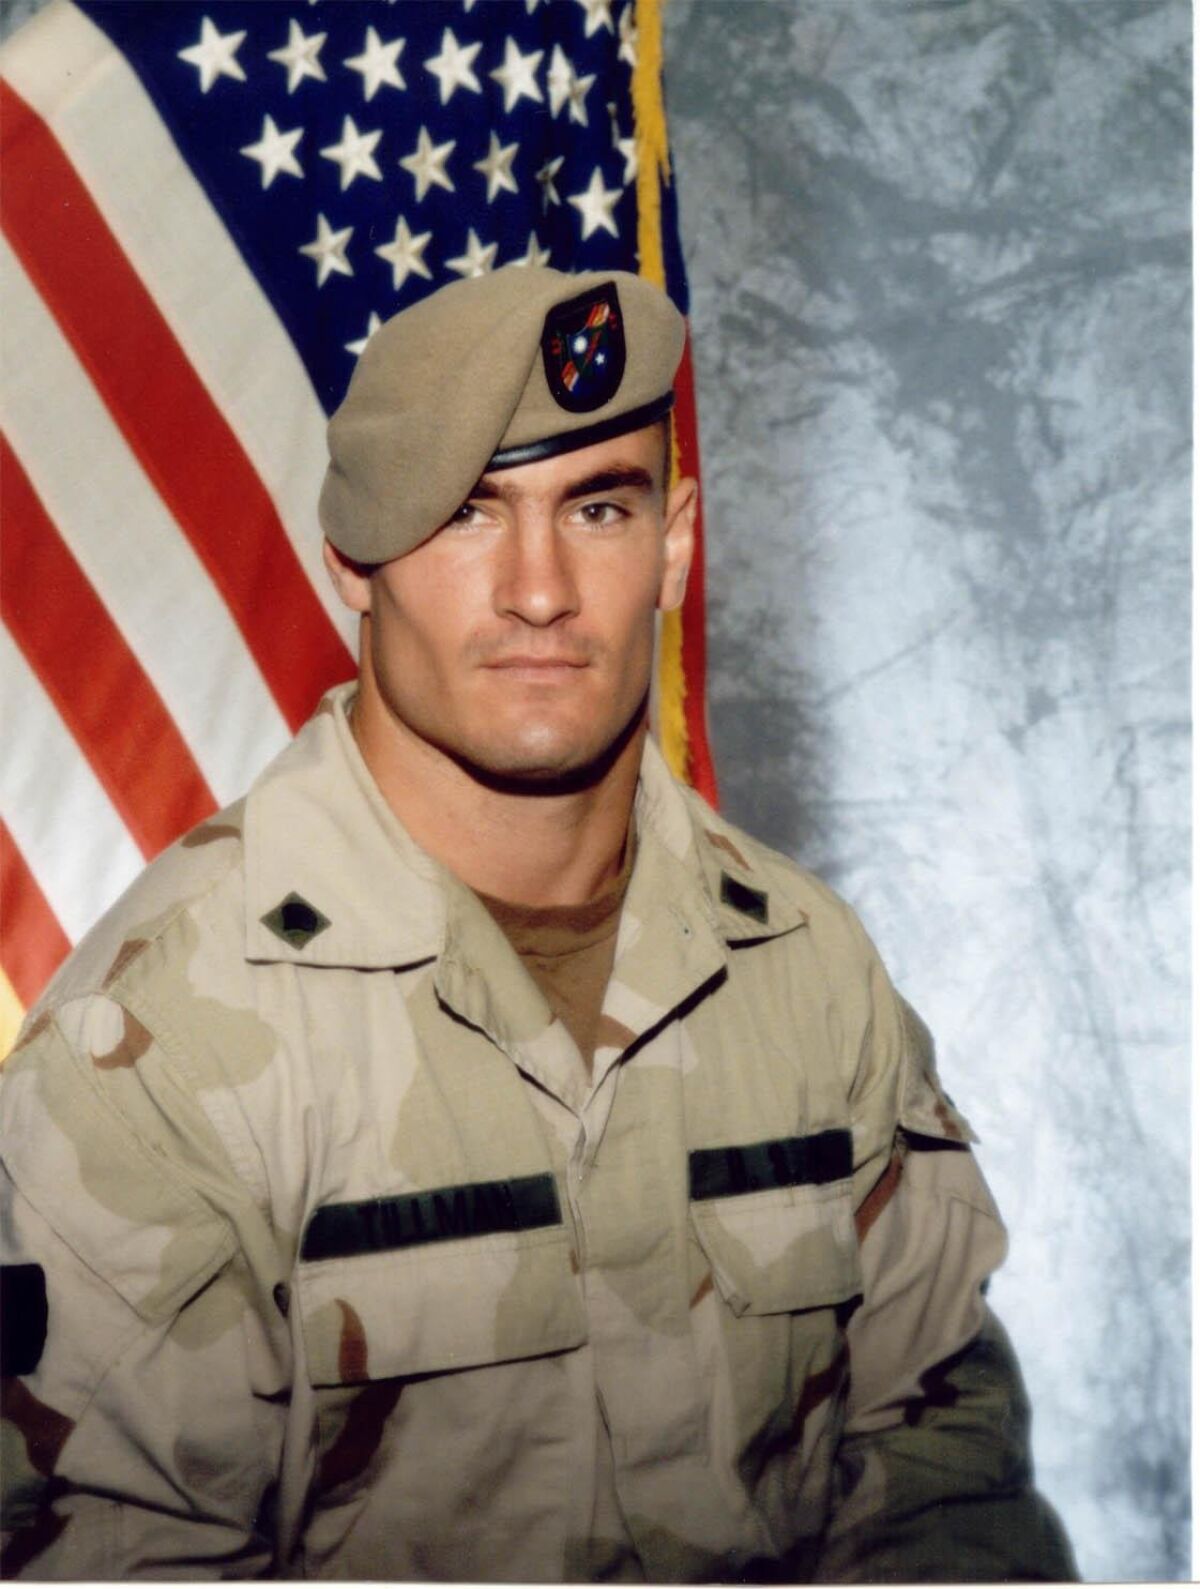 Pat Tillman served with the U.S. Army Rangers.